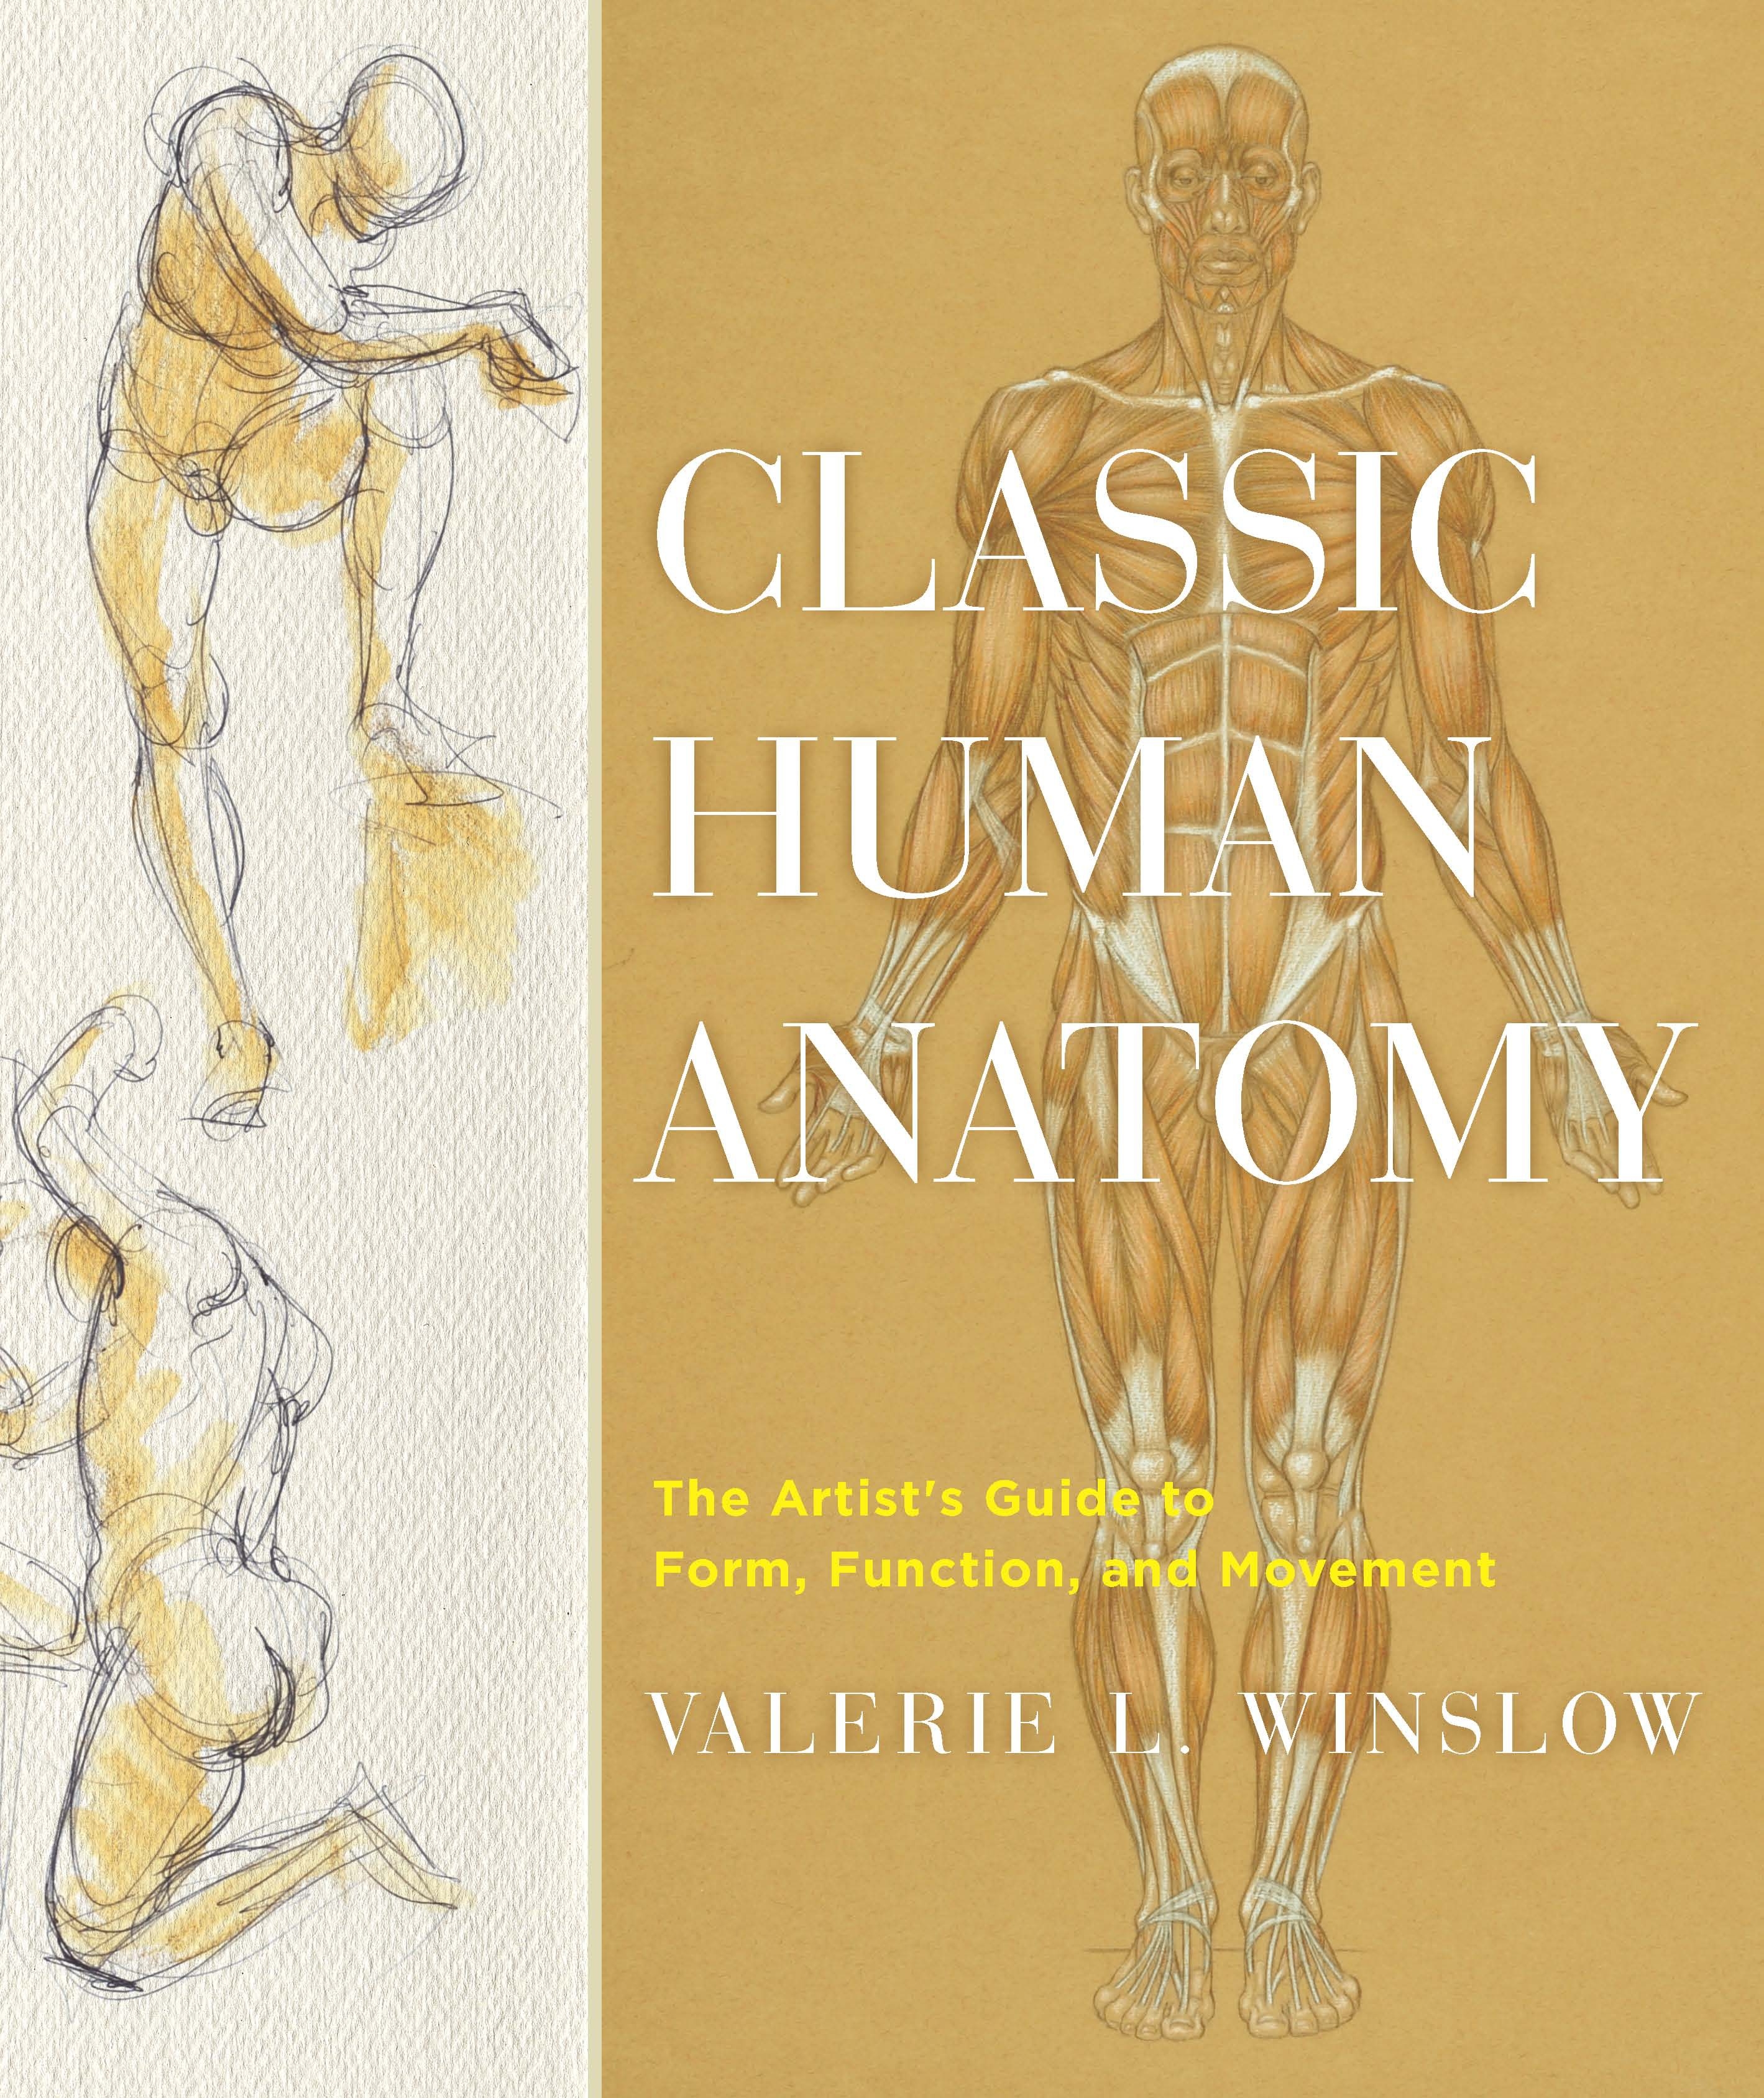 Classic Human Anatomy by Valerie L. Winslow Penguin Books New Zealand